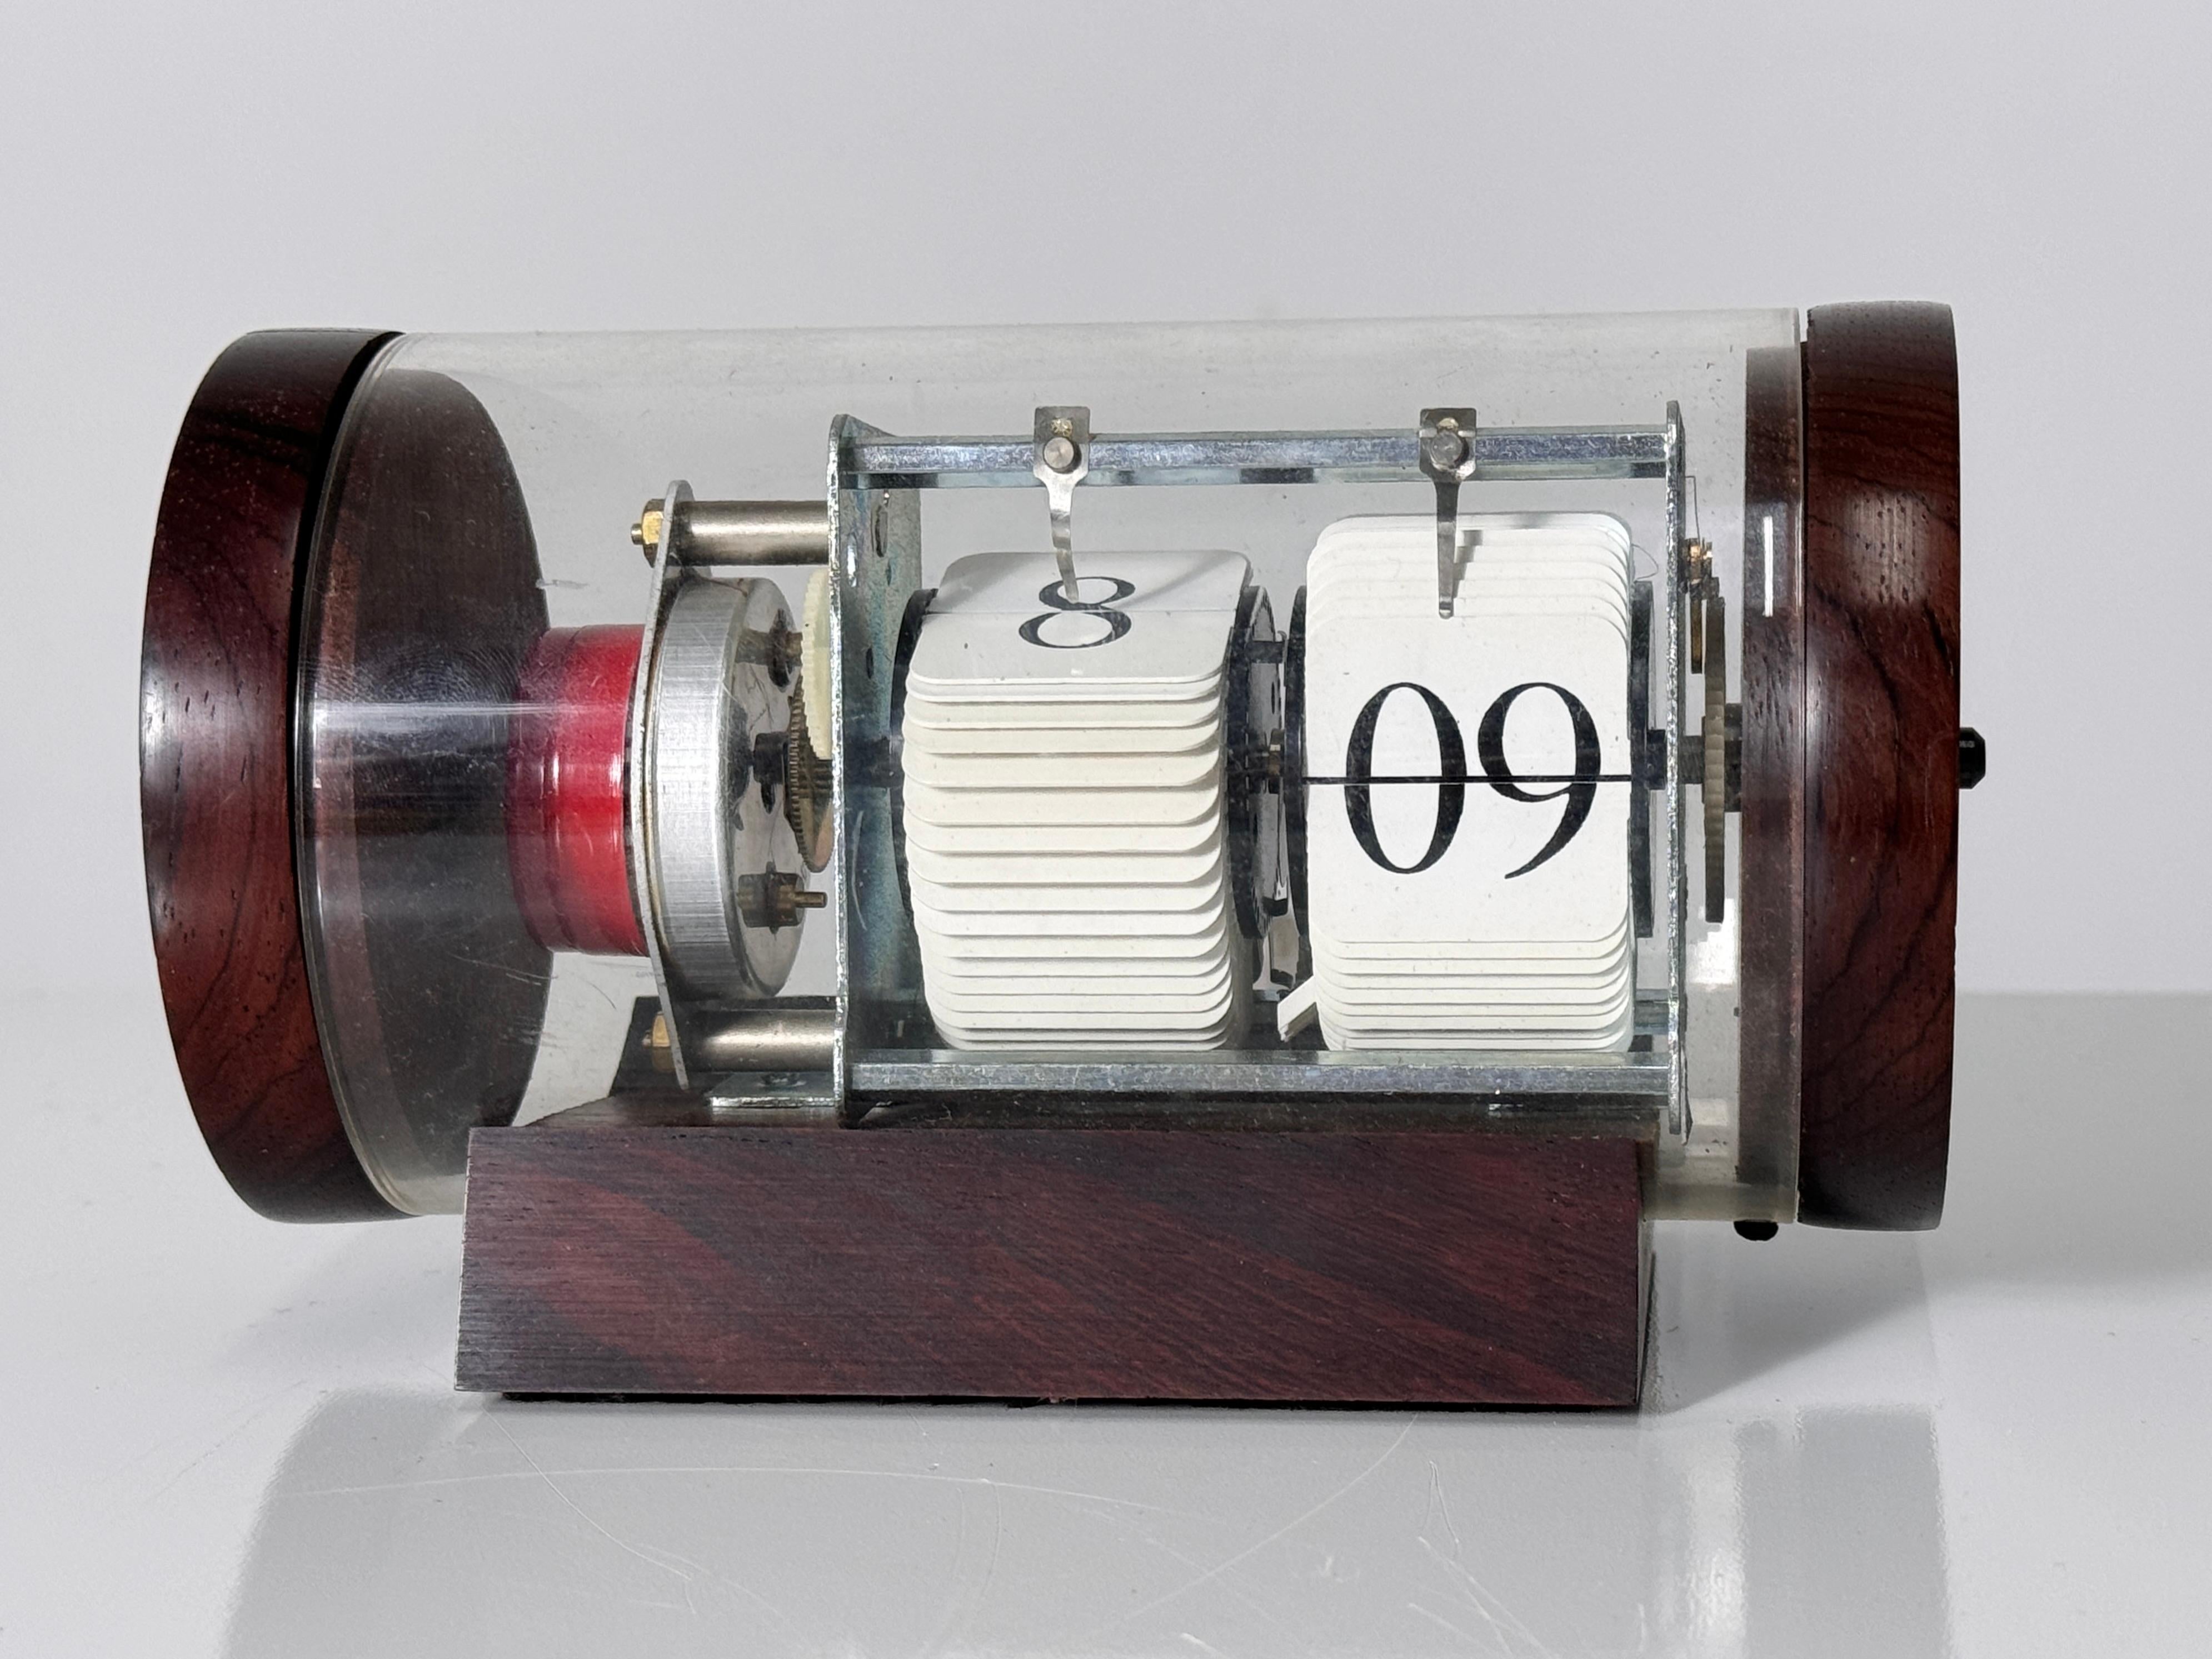 Rare Arthur Umanoff model 4620 desk clock for Howard Miller circa 1960s
Rosewood and acrylic cylinder case with exposed movement and flip numbers
Original label intact

Please note motor runs but the numbers do not flip
Being sold for decorative